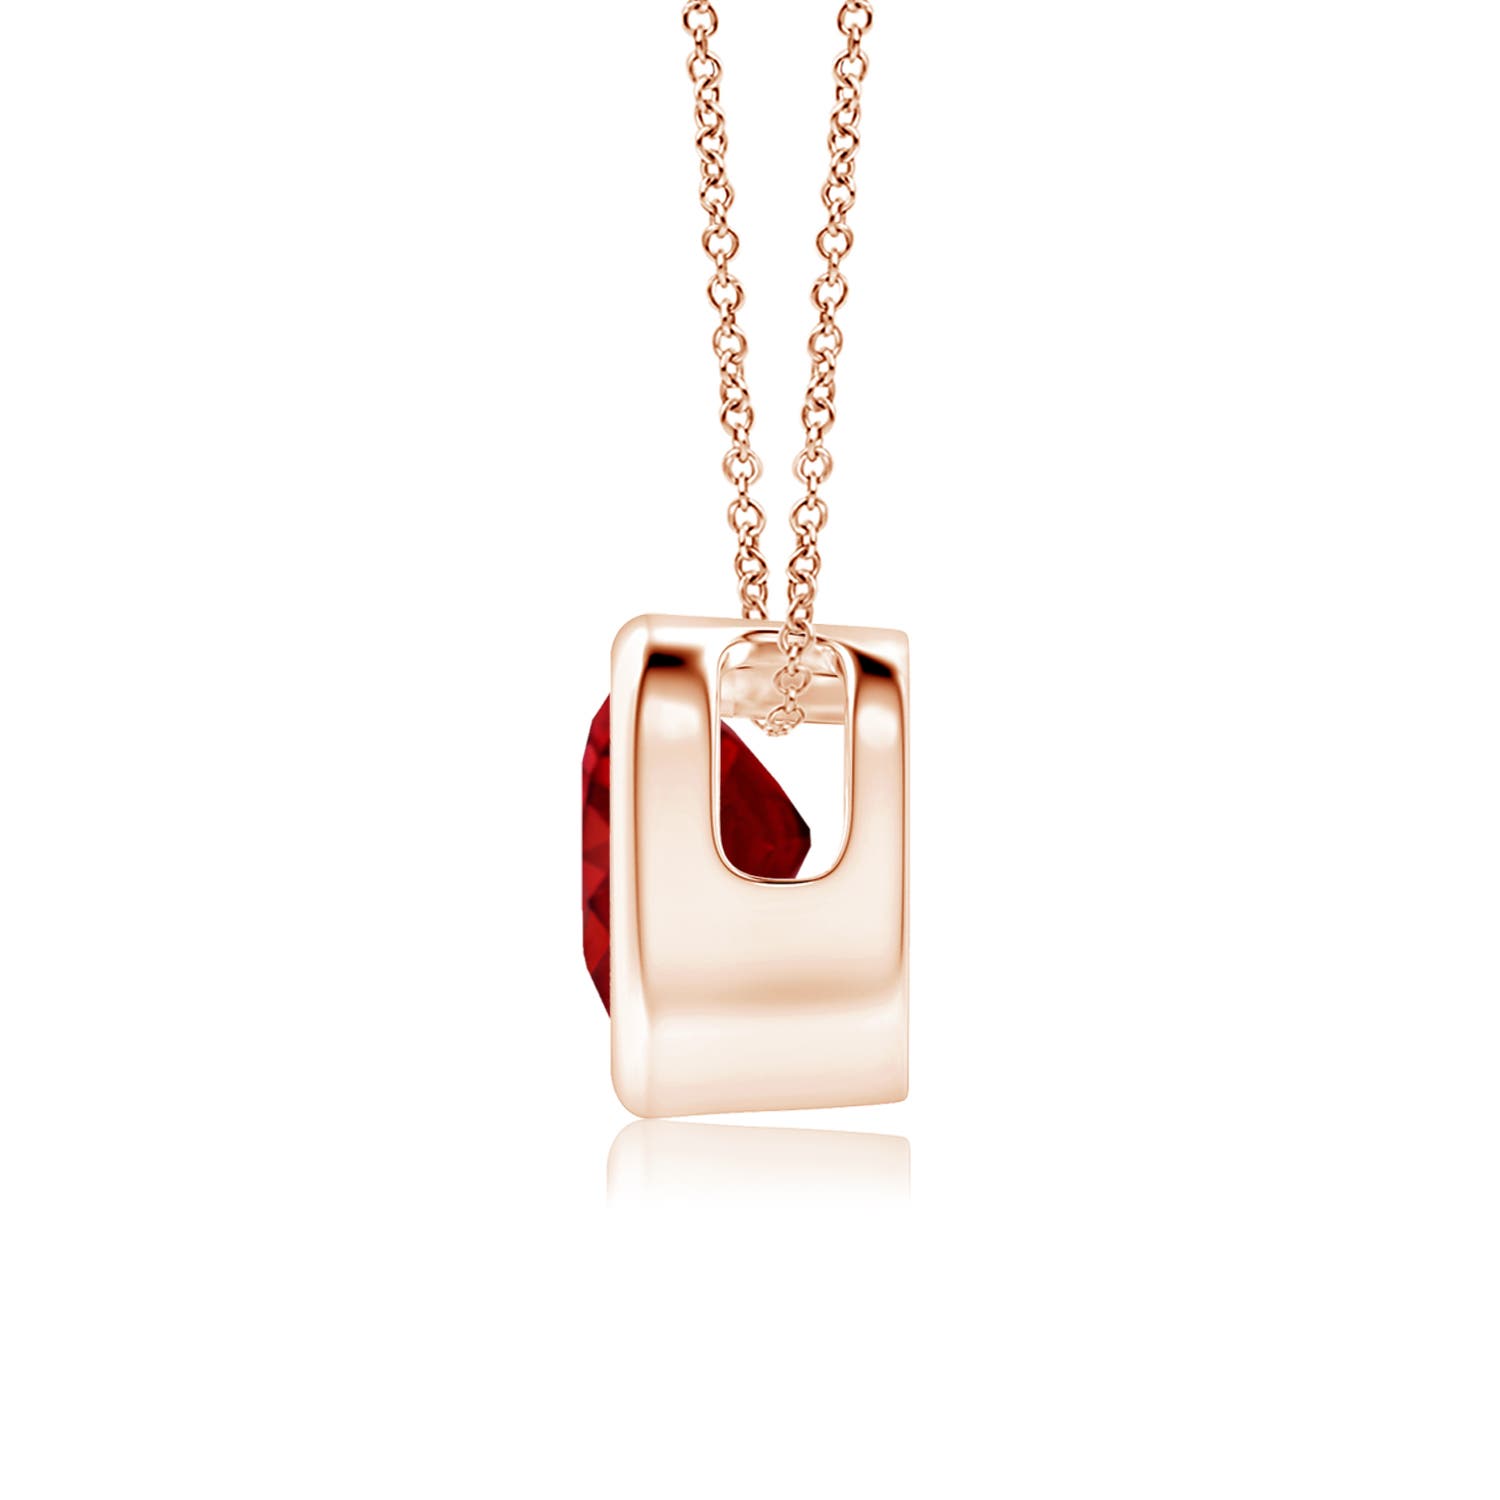 AAAA - Ruby / 0.55 CT / 14 KT Rose Gold